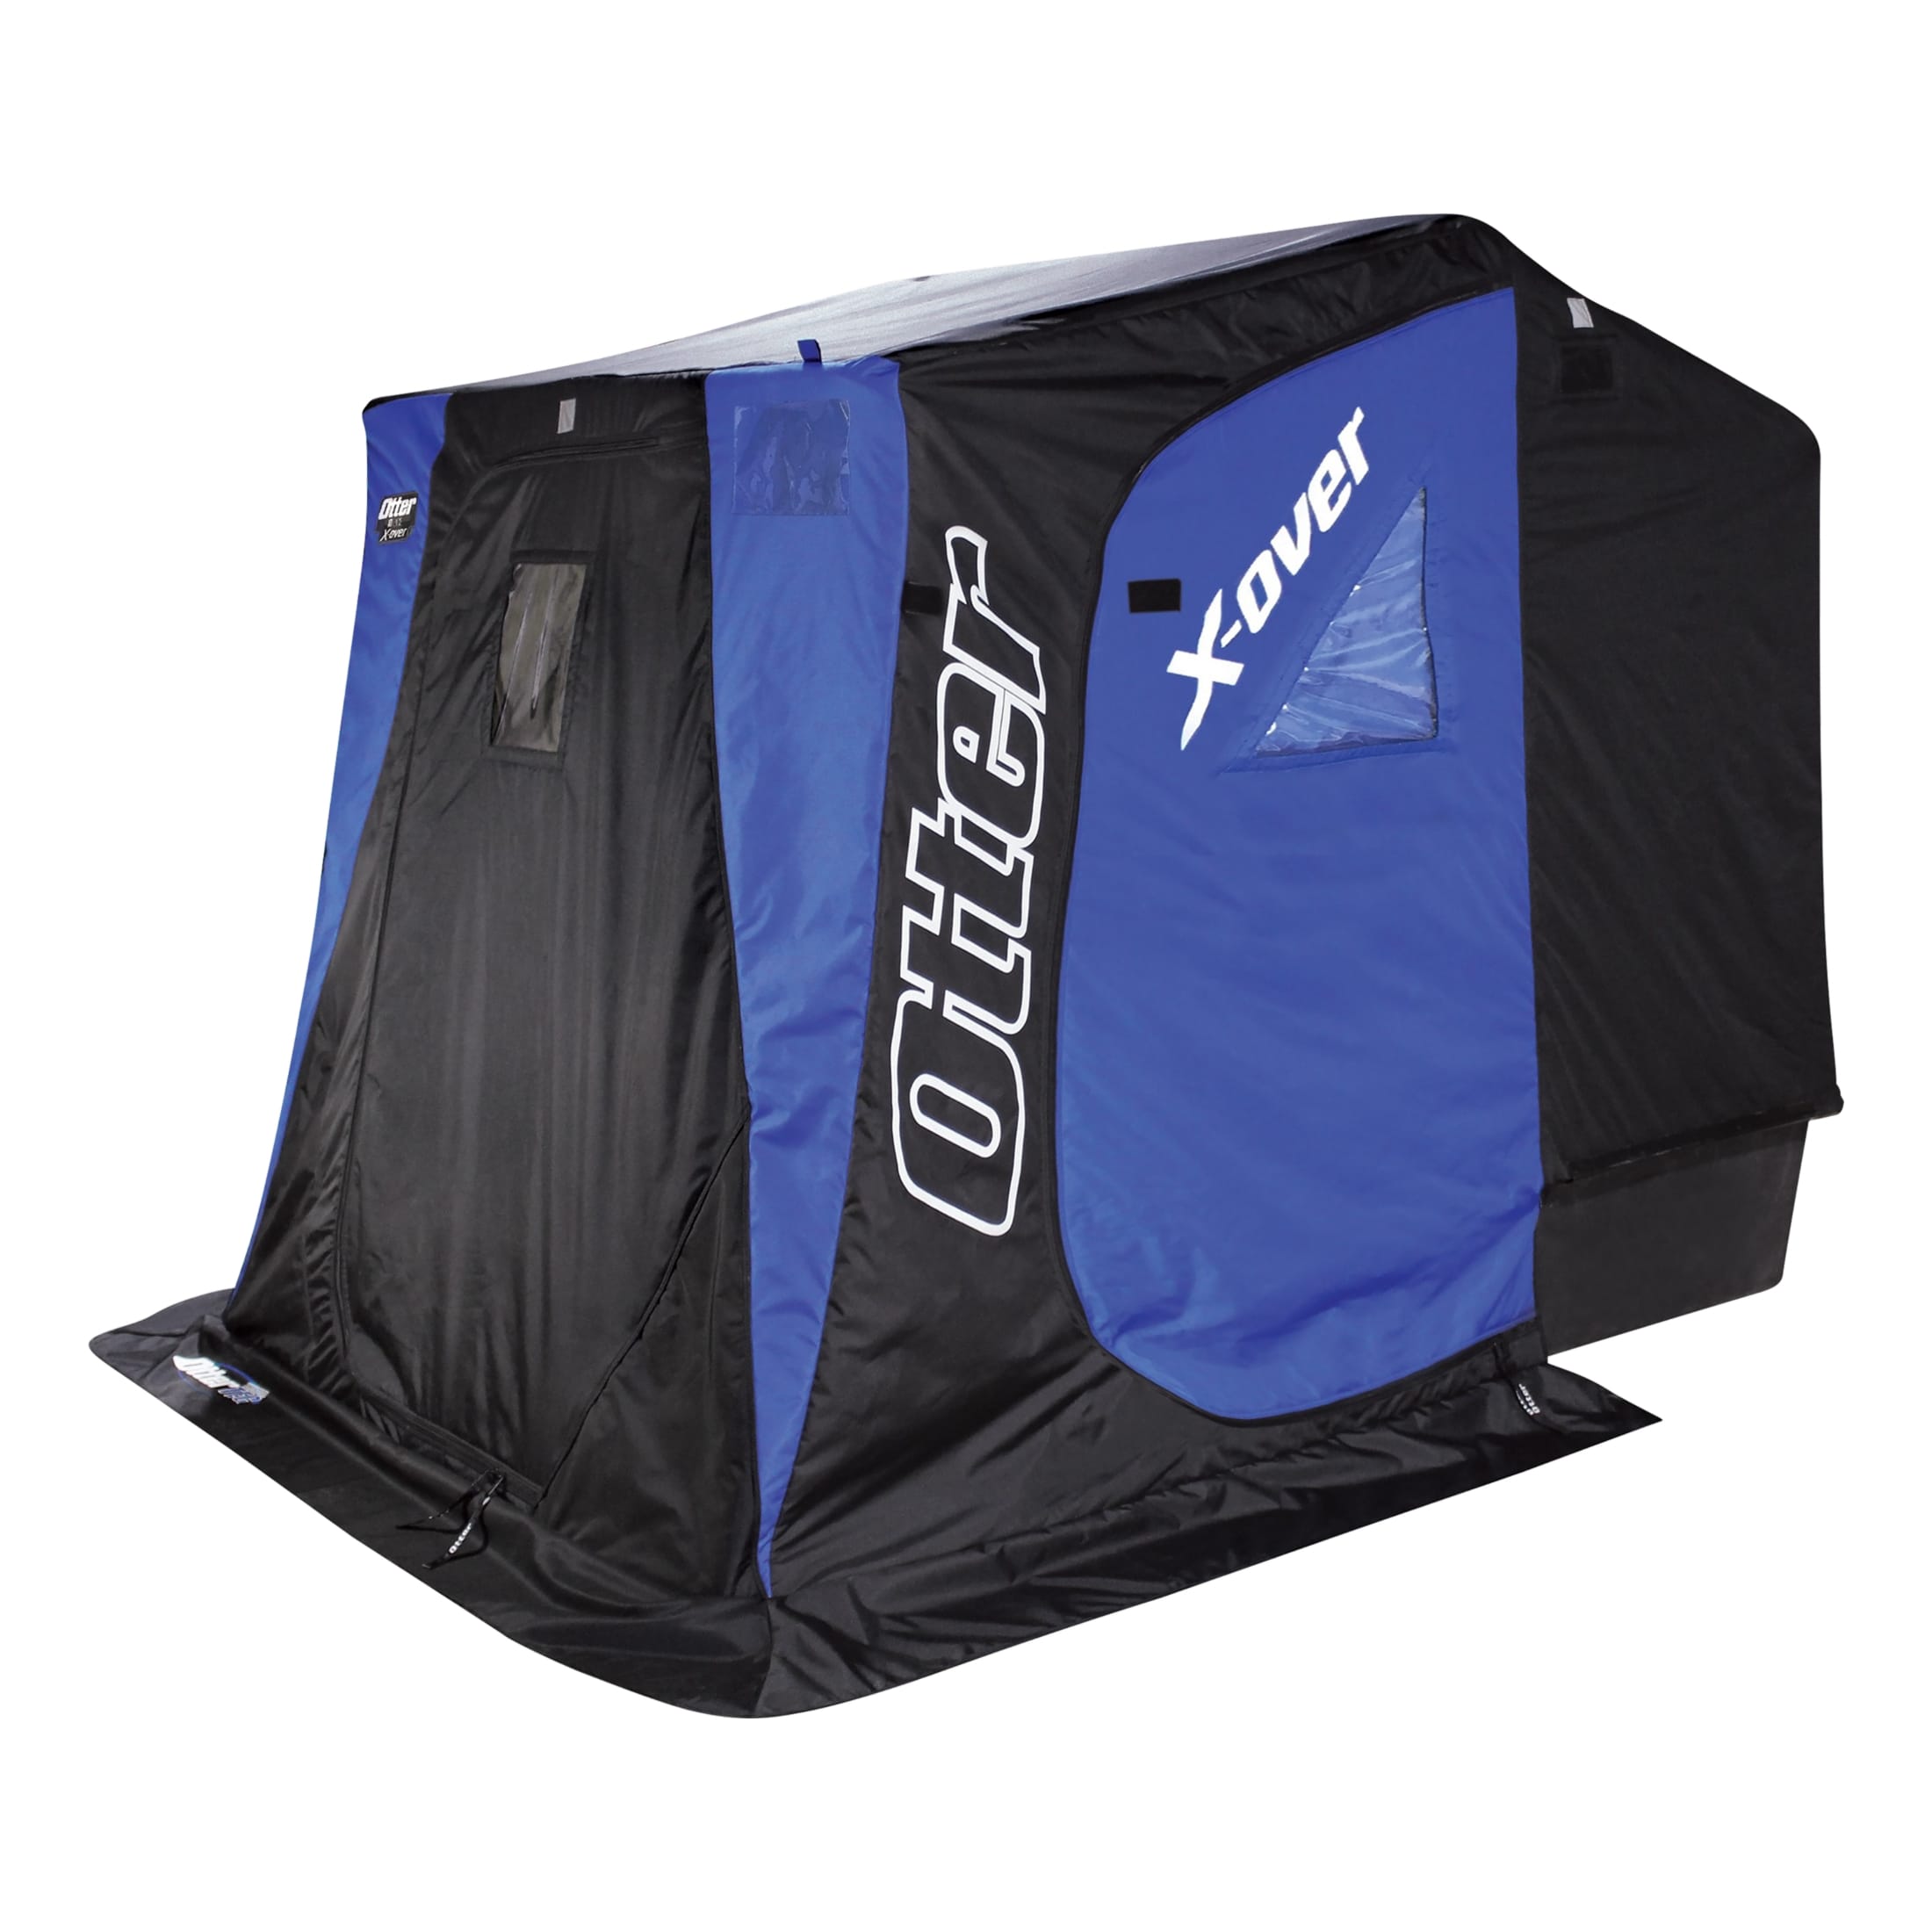 Otter Outdoors XT X-Over Cabin Ice Shelter